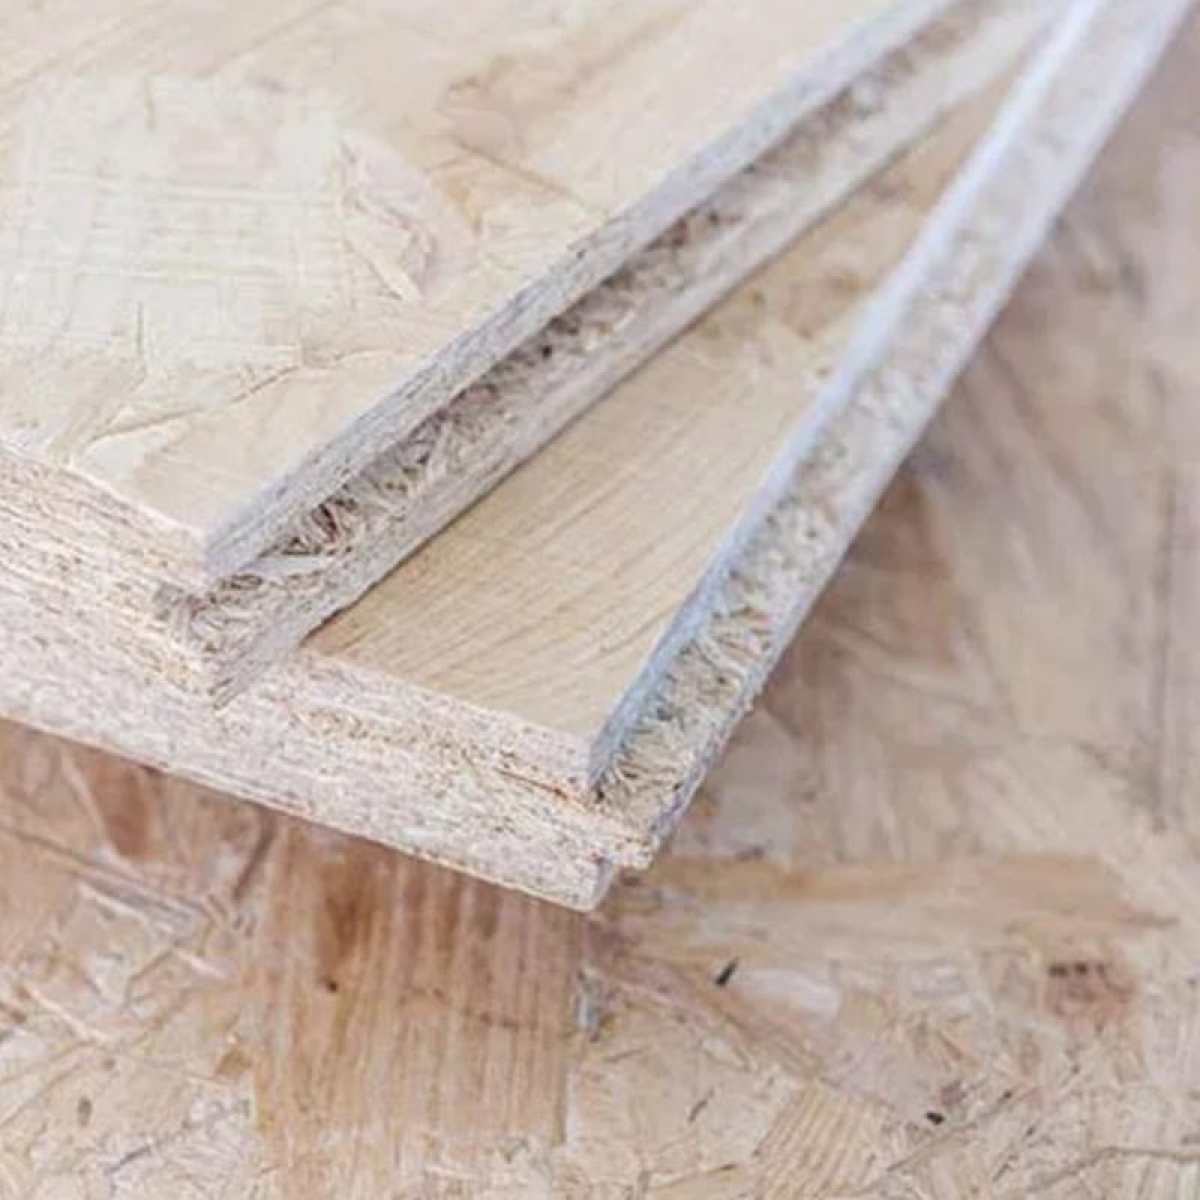 osb tongue and groove flooring sheet material websterstimber 800x800 1 Image by Websters Timber